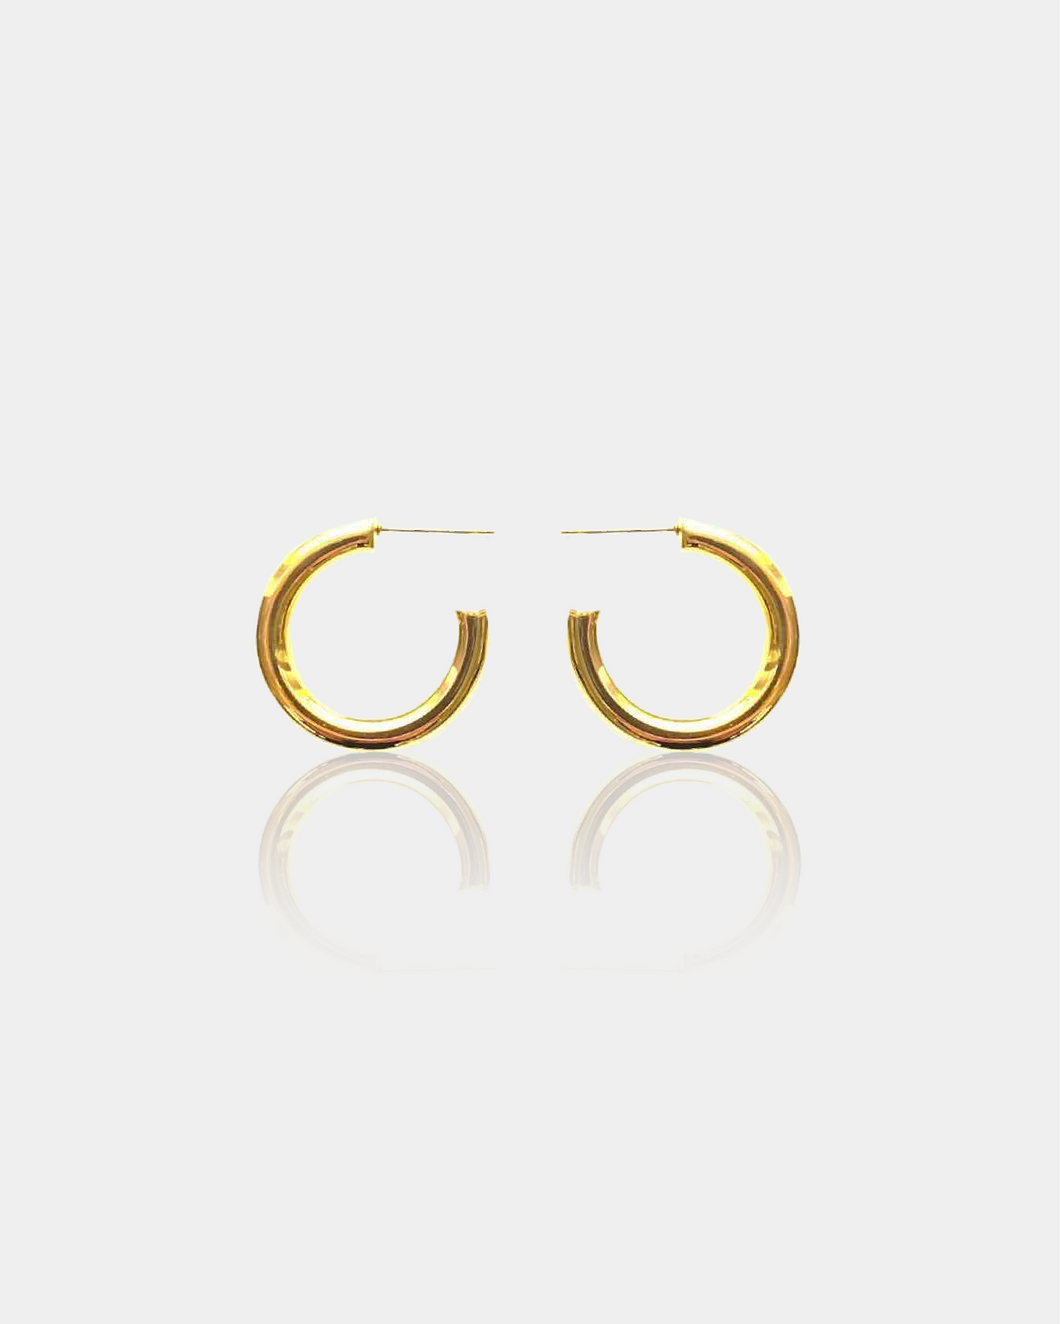 Perfect Gold Hoops - 1